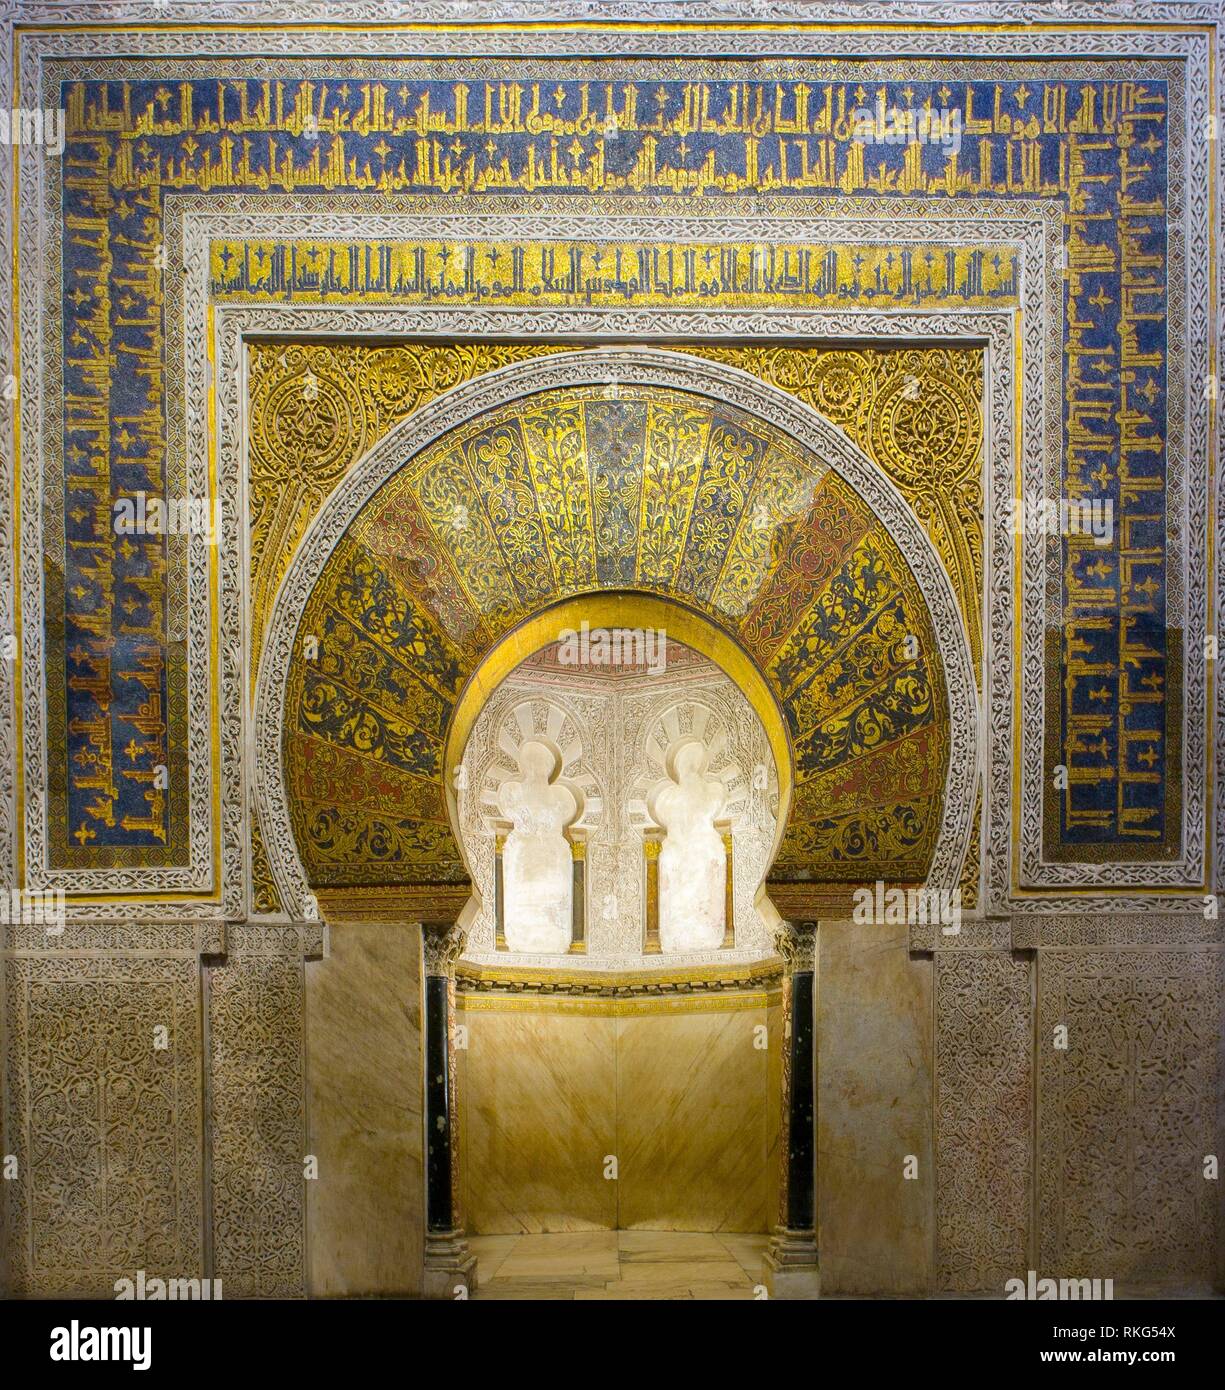 Richly gilded prayer niche or Mihrab of Cordoba Mosque. Andalusia, Spain. Stock Photo